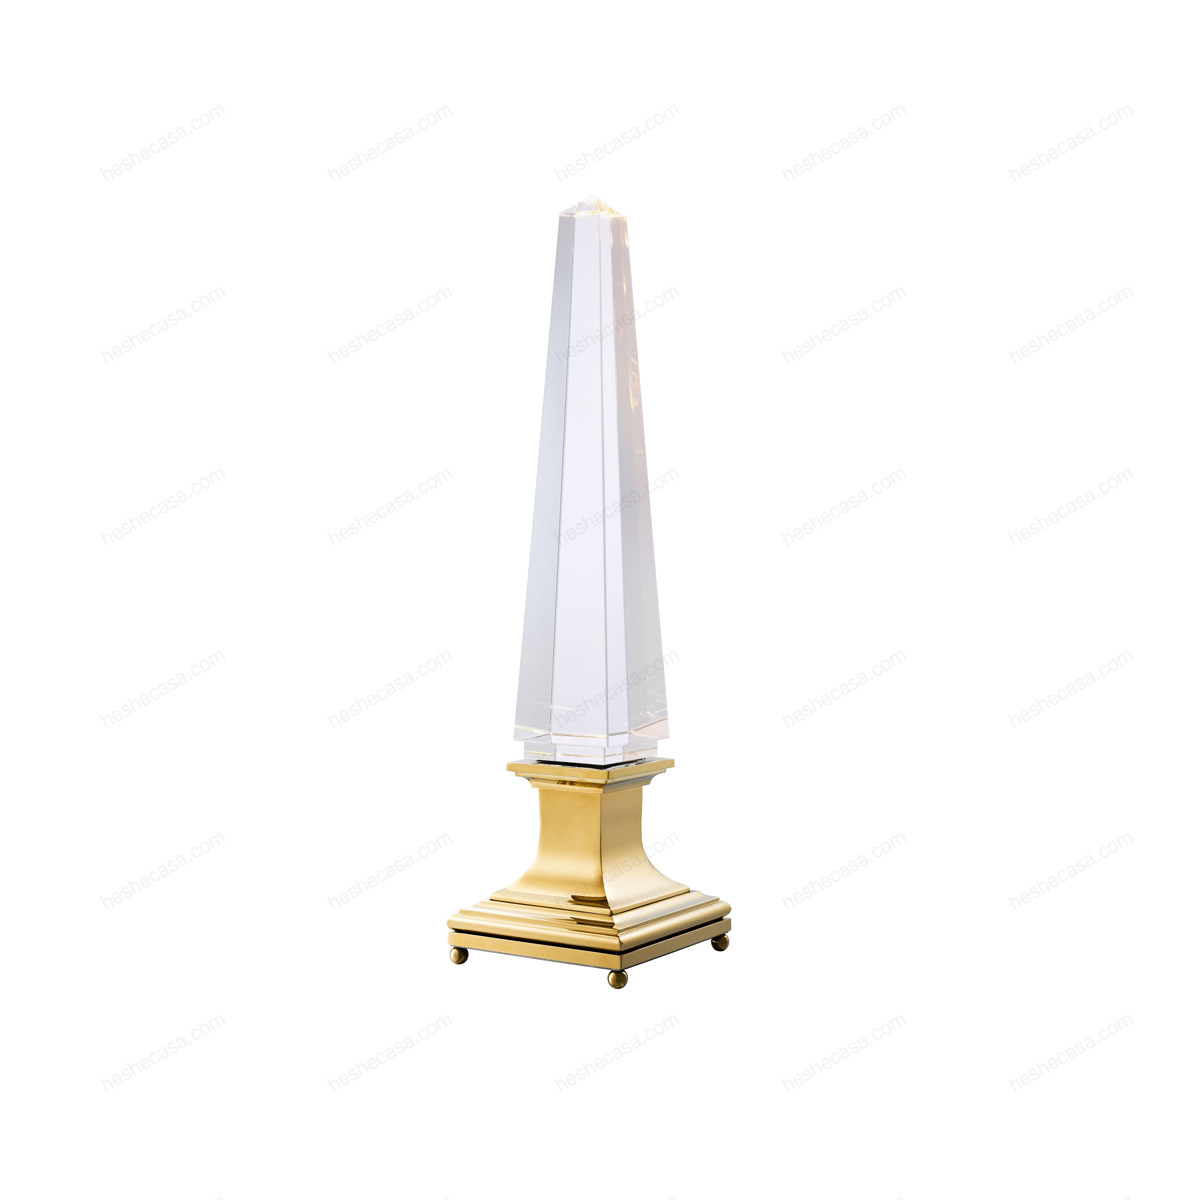 Table Lamp Solaire台灯